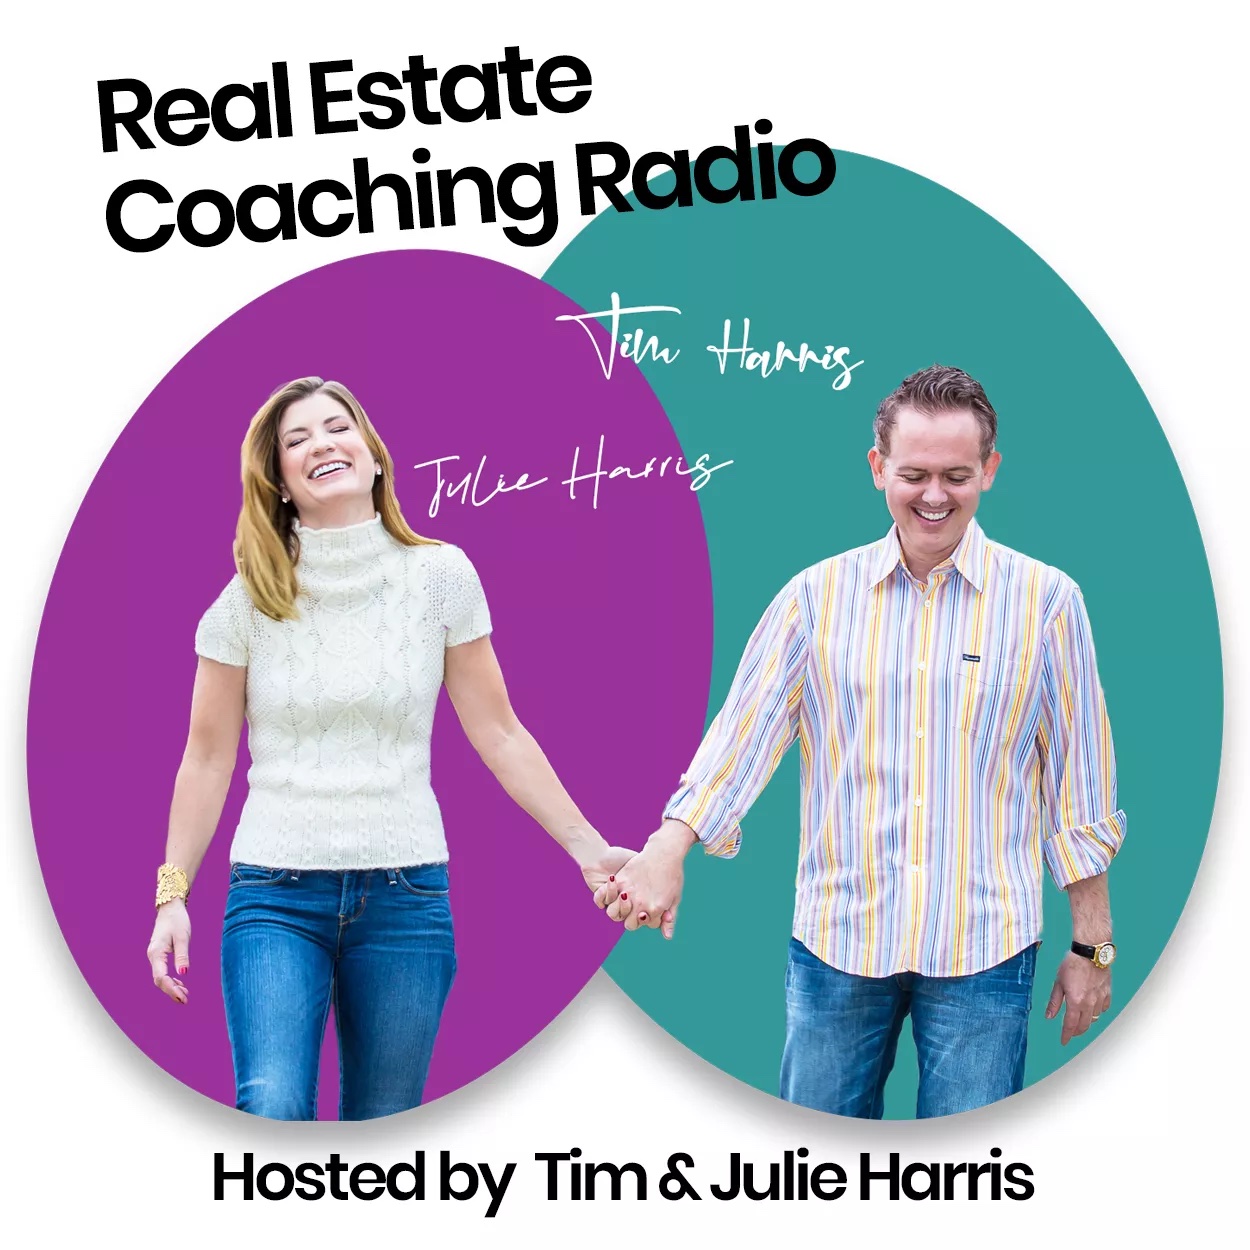 Fresh update on "the next 12 months" discussed on Real Estate Coaching Radio